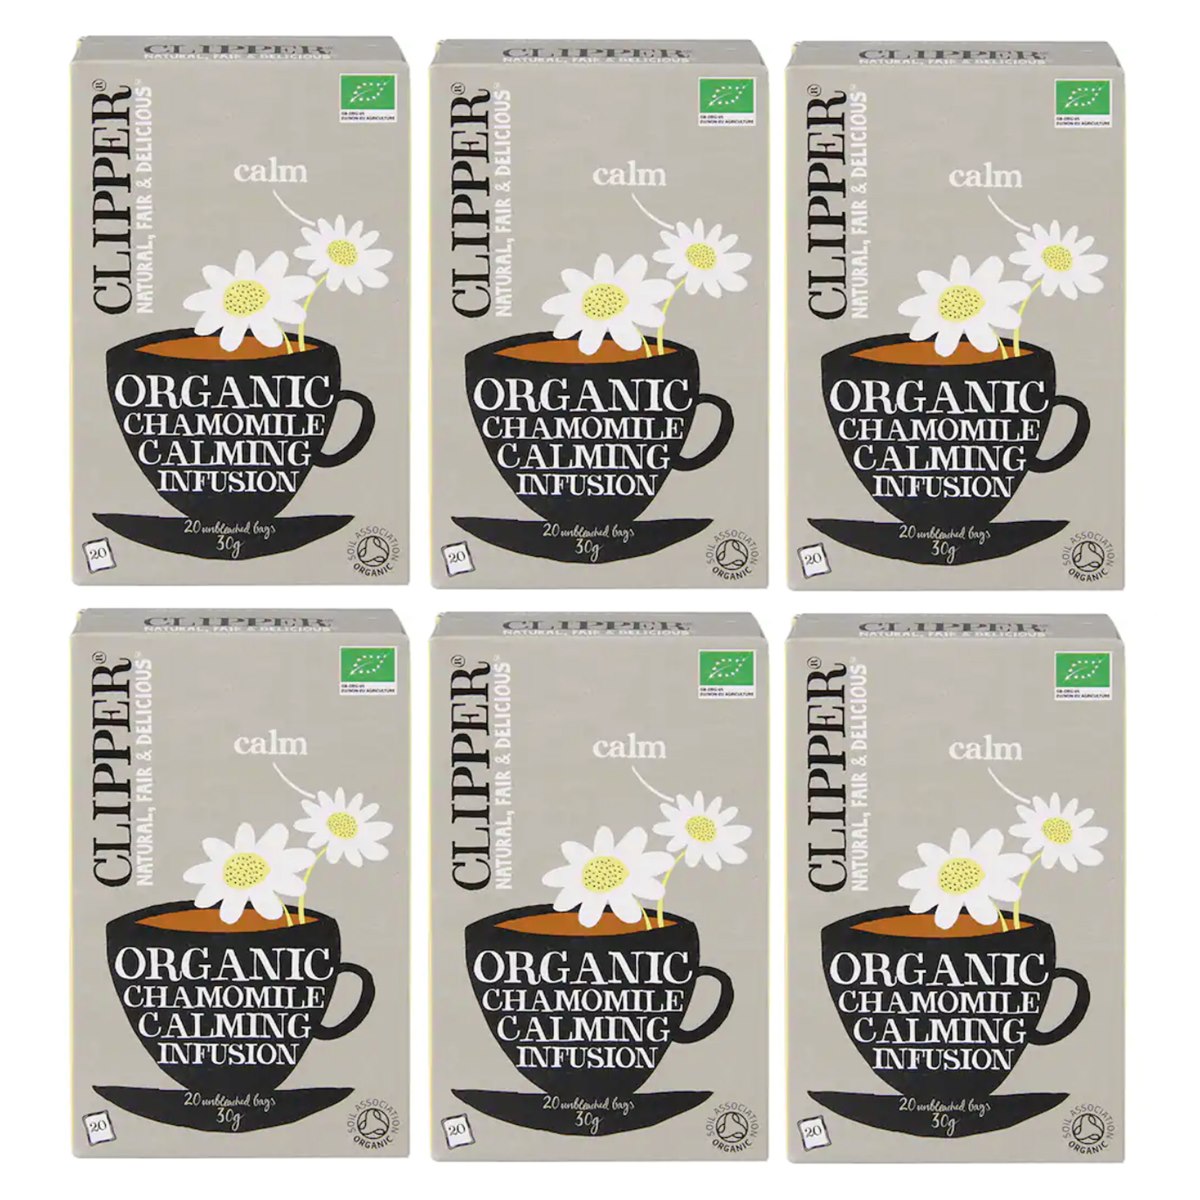 Case of 6 Clipper Organic Calming Chamomile Infusion 20 Enveloped Bags 30g